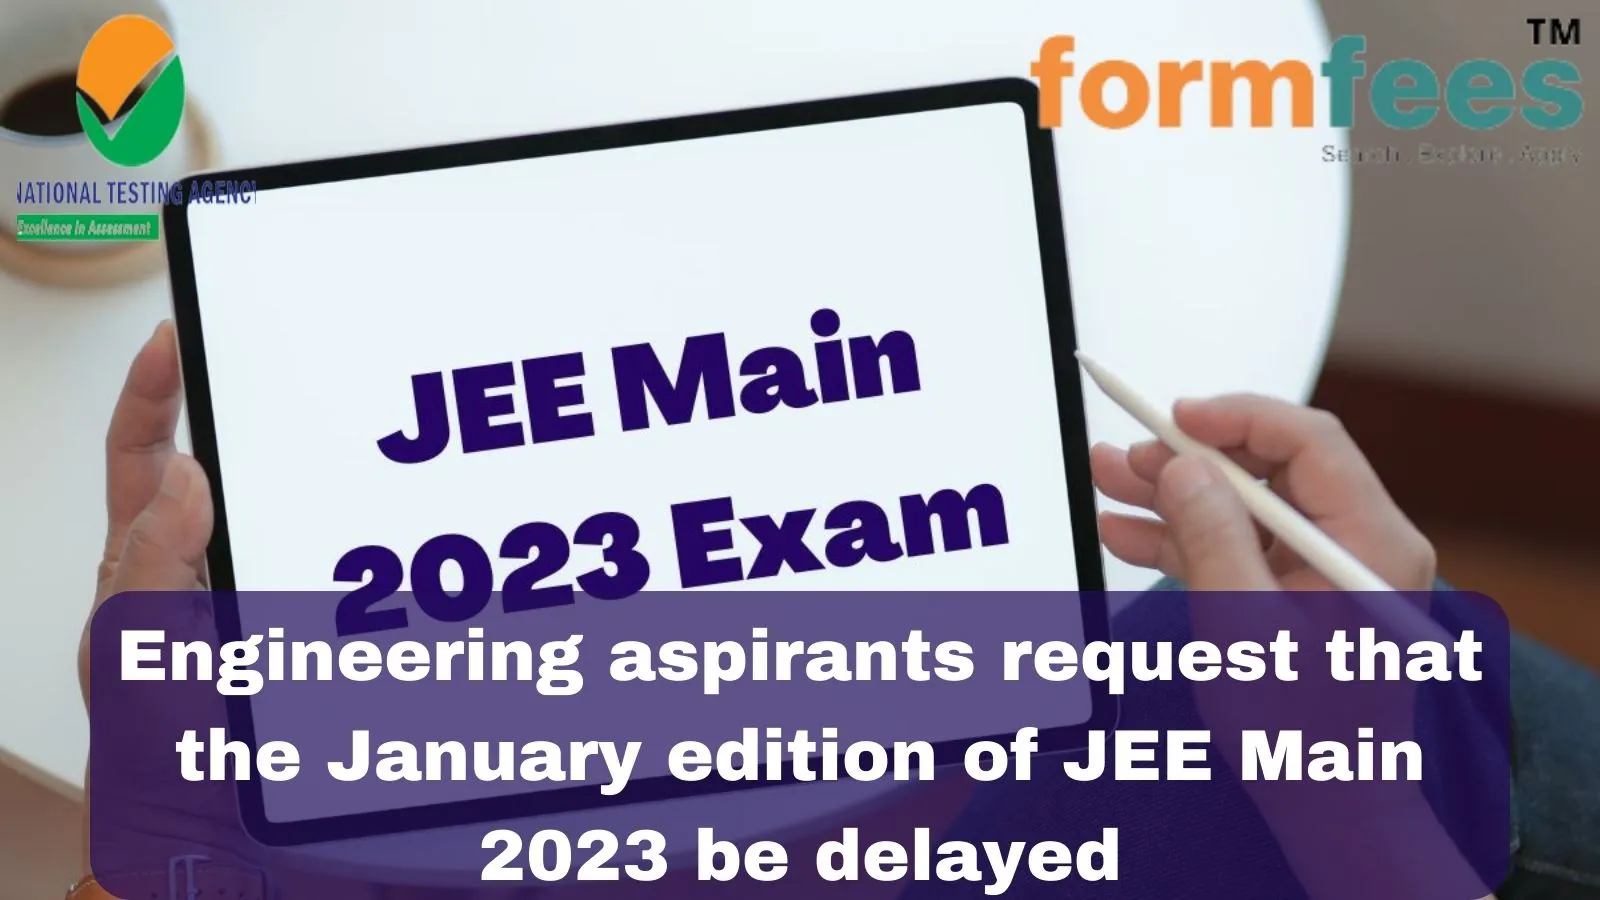 Engineering aspirants request that the January edition of JEE Main 2023 be delayed because the dates conflict with board exams